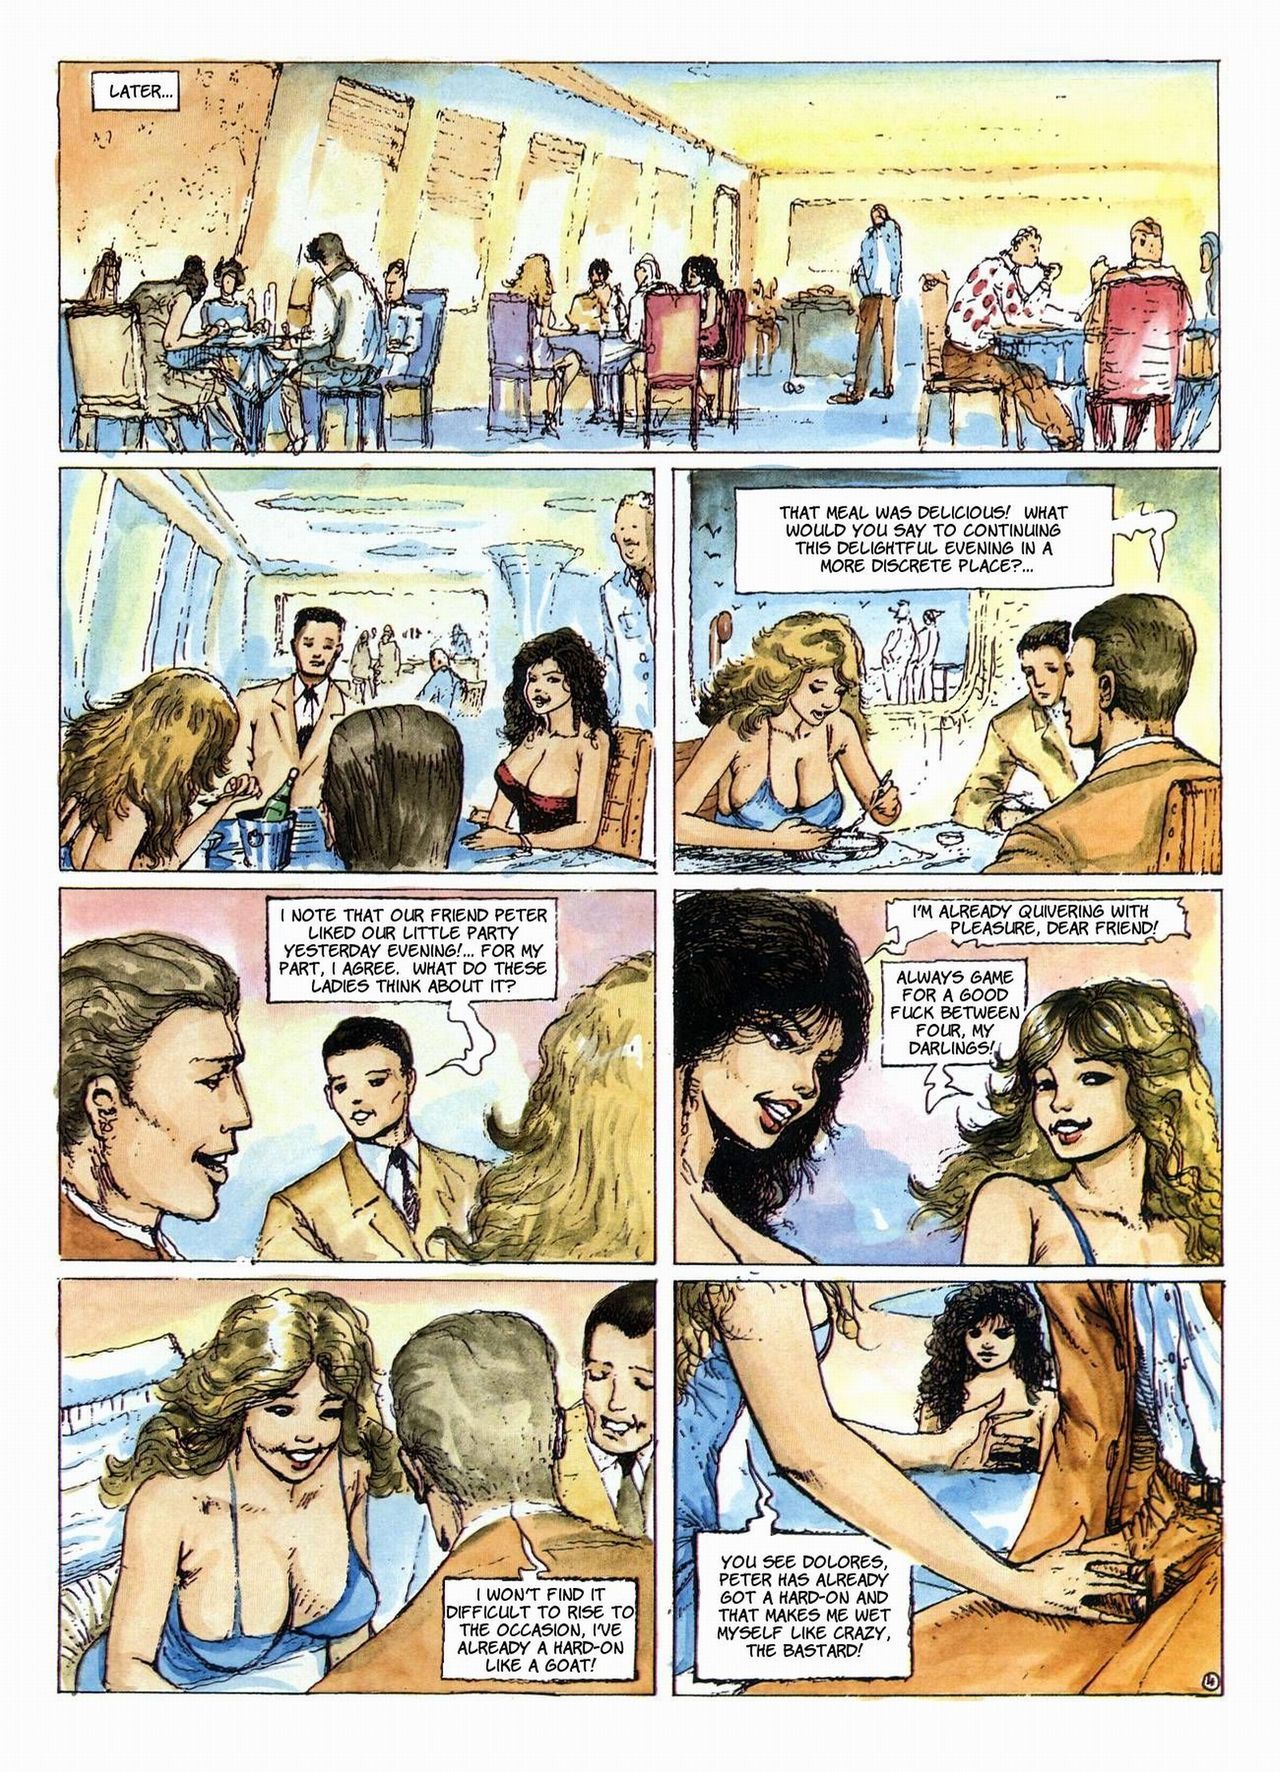 The Island Of Perversions Peter Riverstone page 5